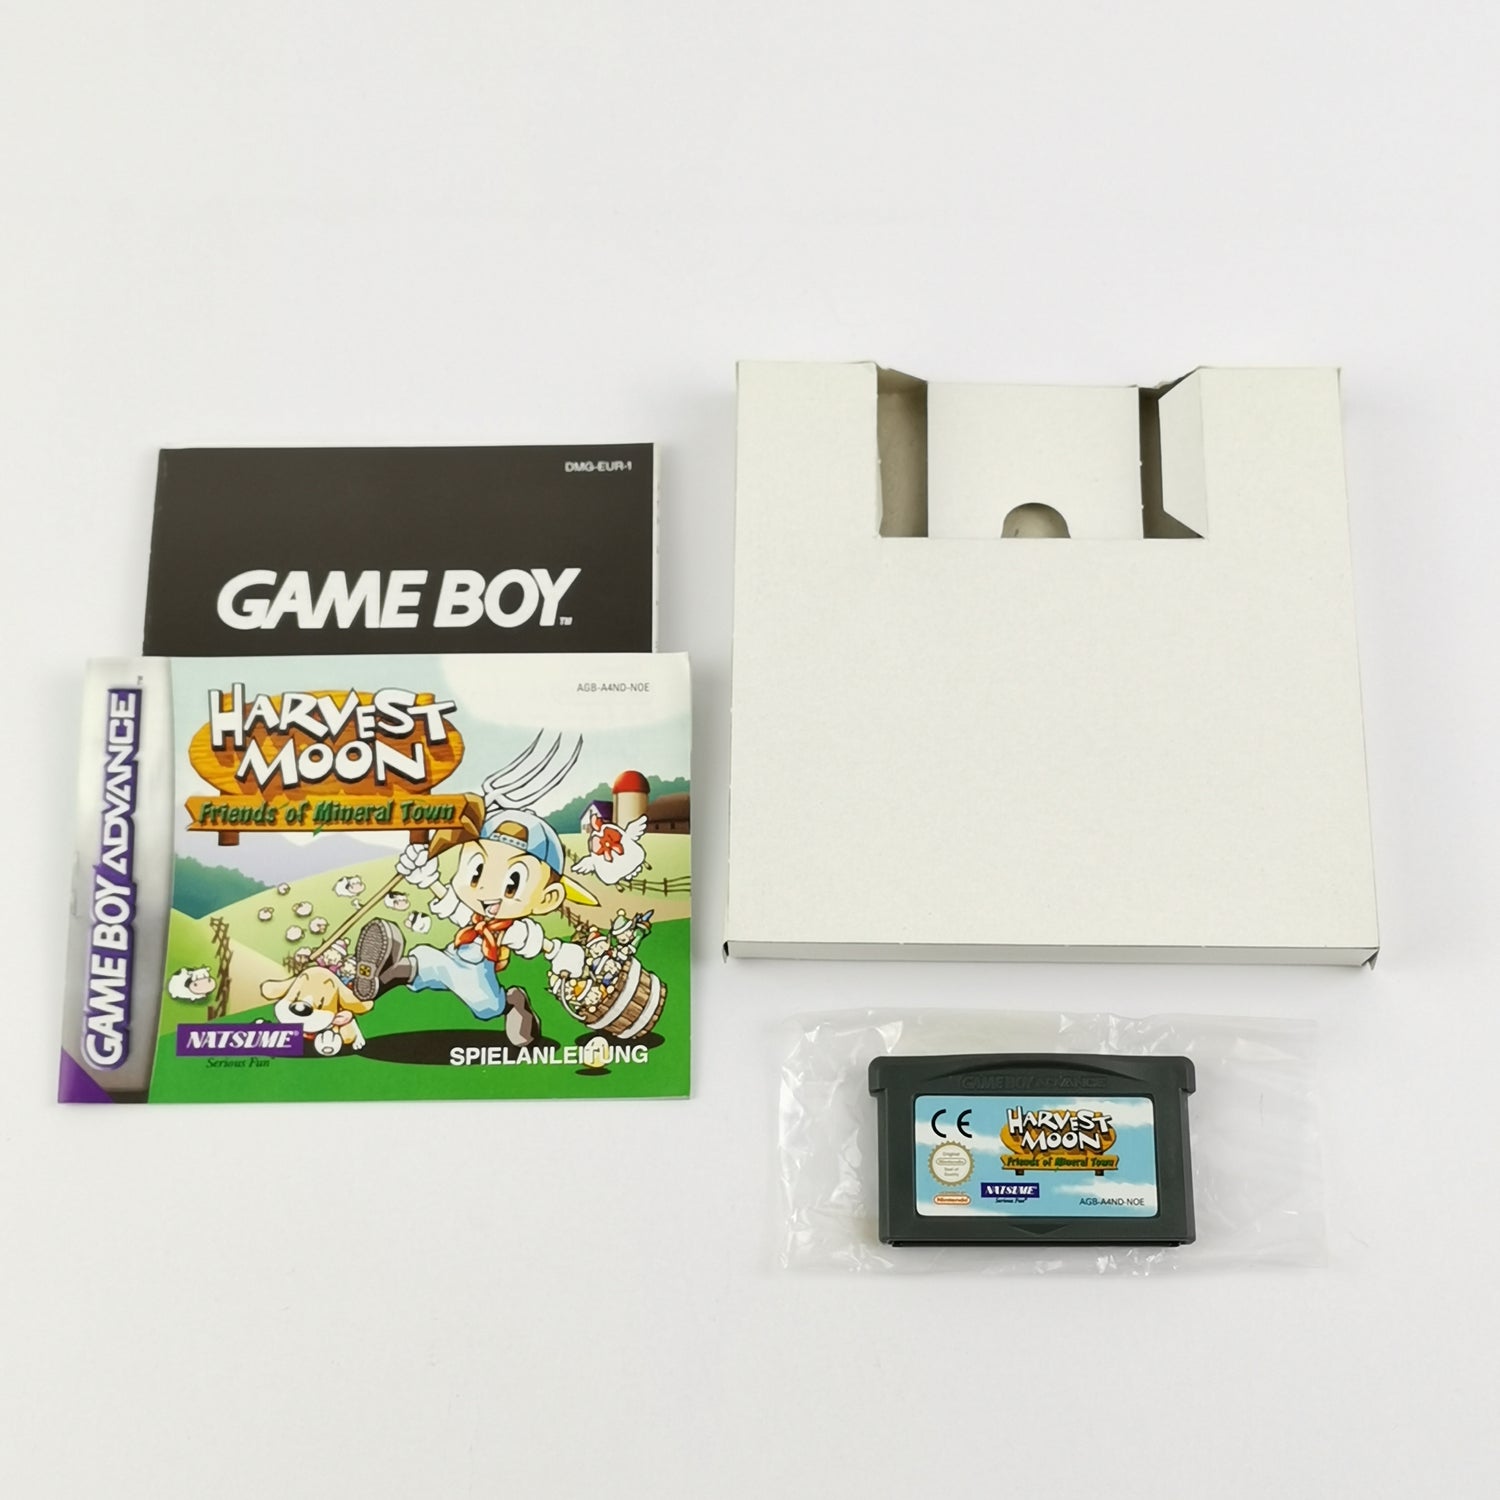 Nintendo Game Boy Advance Game: Harvest Moon Friends of Mineral Town - OVP GBA